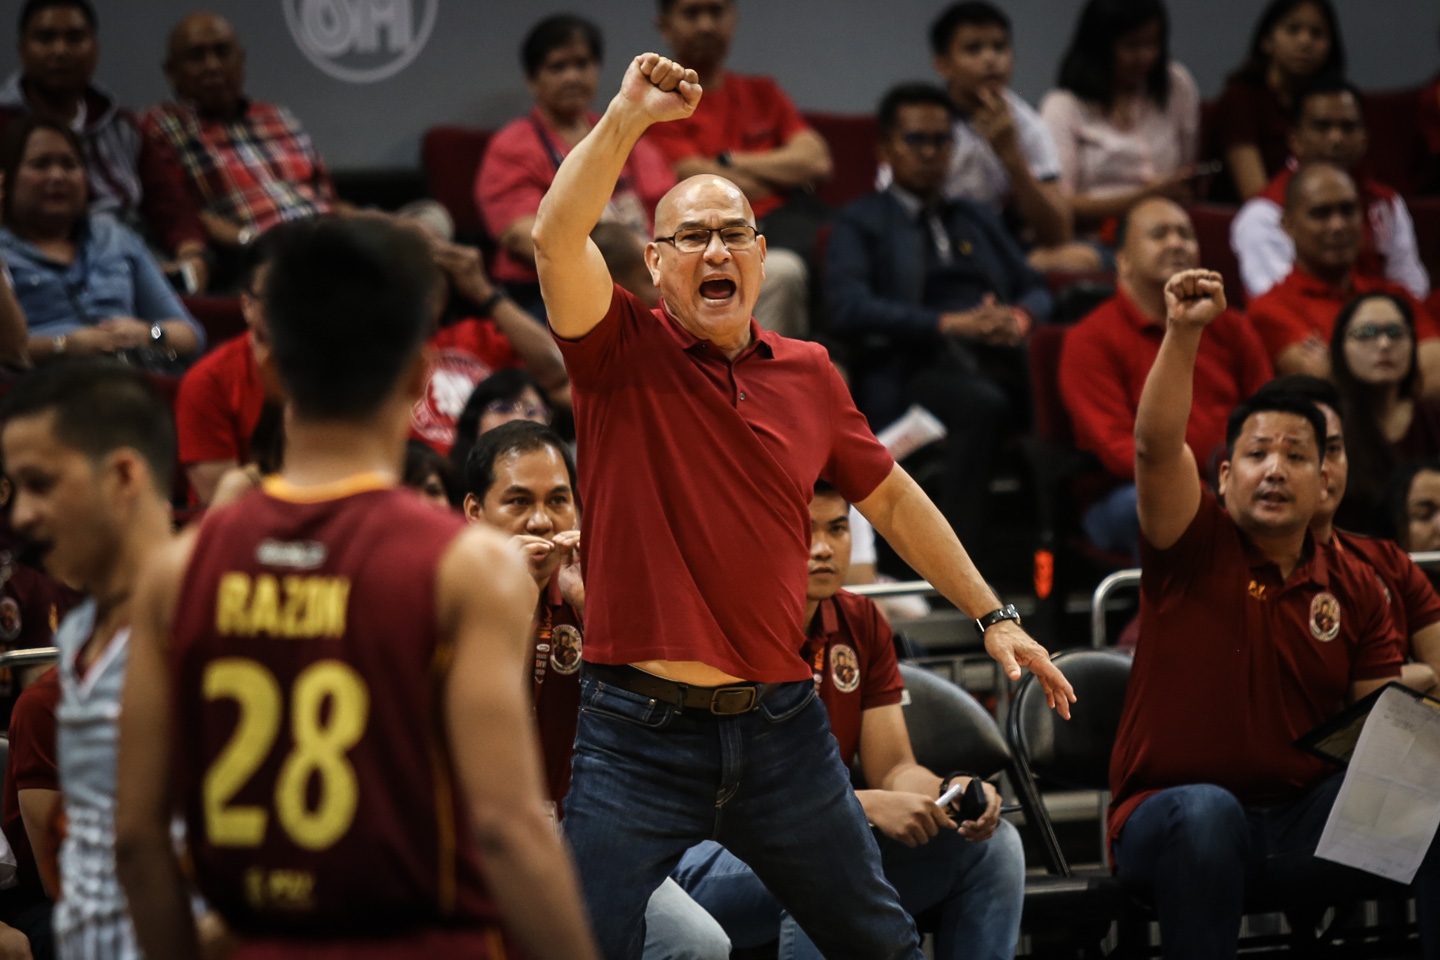 New Perpetual coach Frankie Lim gives former team San Beda a fright